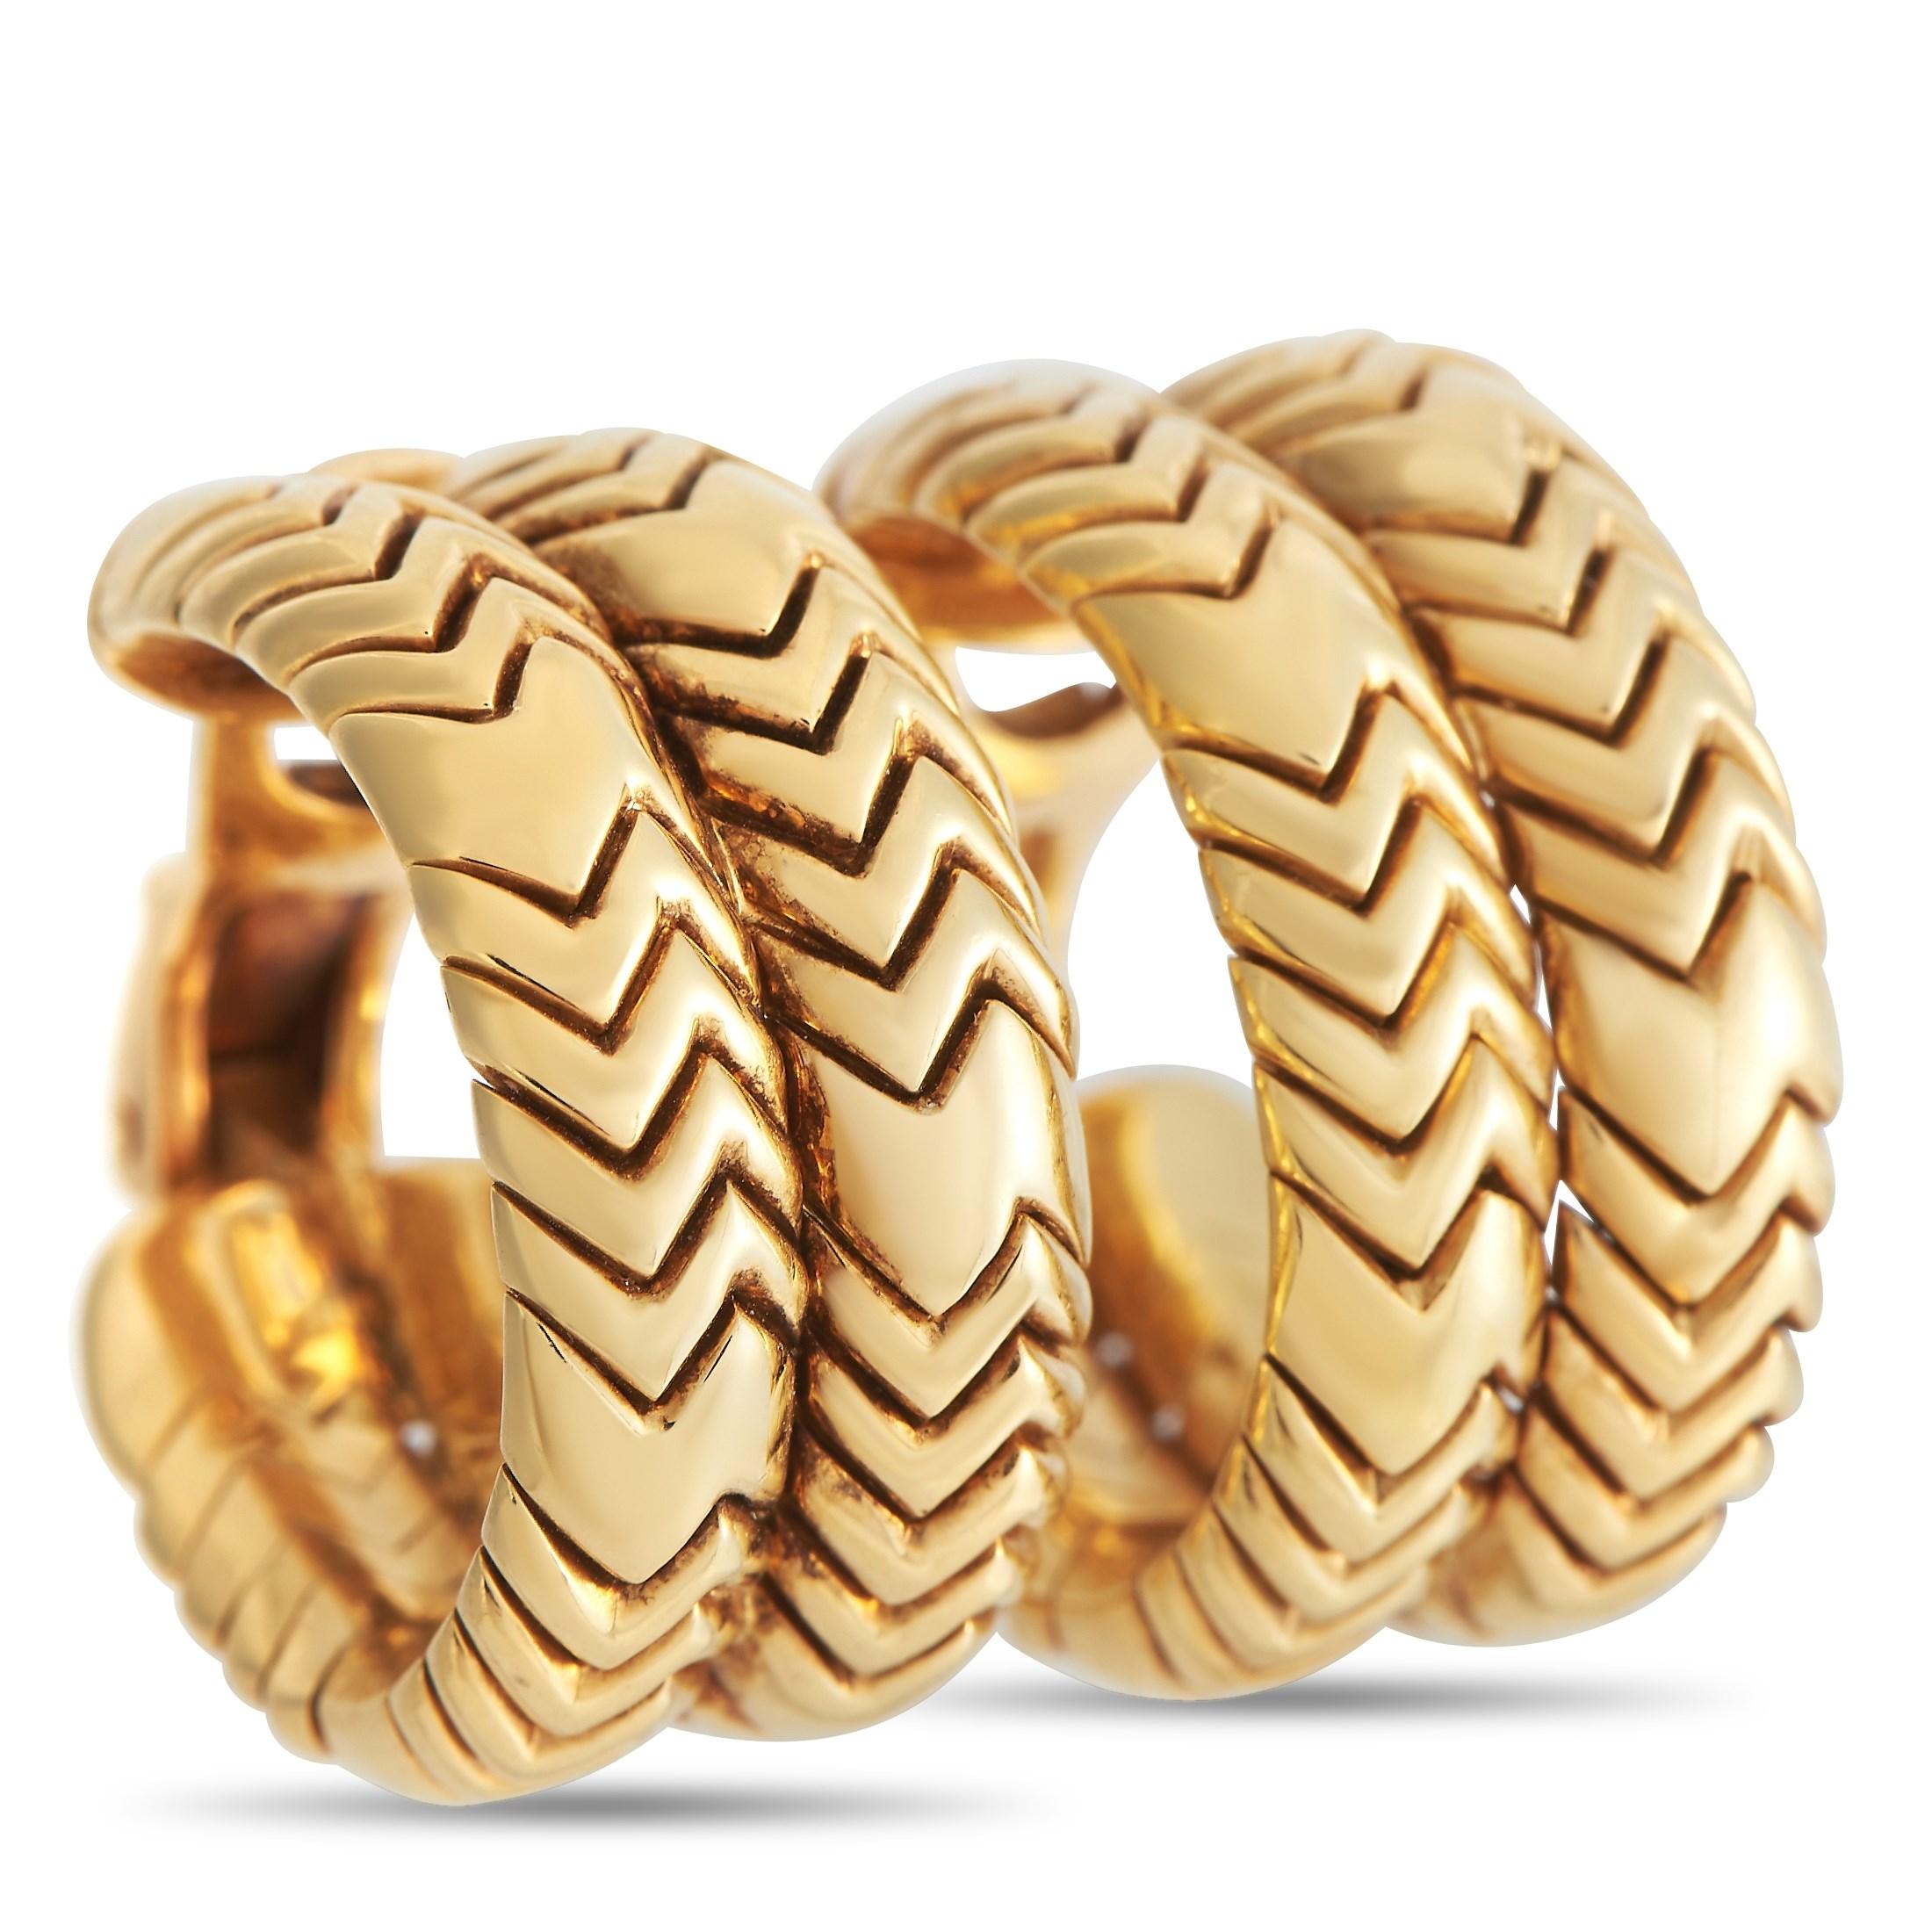 Incredibly opulent, these 18K Yellow Gold Bvlgari Spiga earrings have a sleek, sophisticated sense of style. A contemporary chevron pattern adds extra visual impact to each one of these earrings, which measure 0.37” long and 0.80” wide.

This